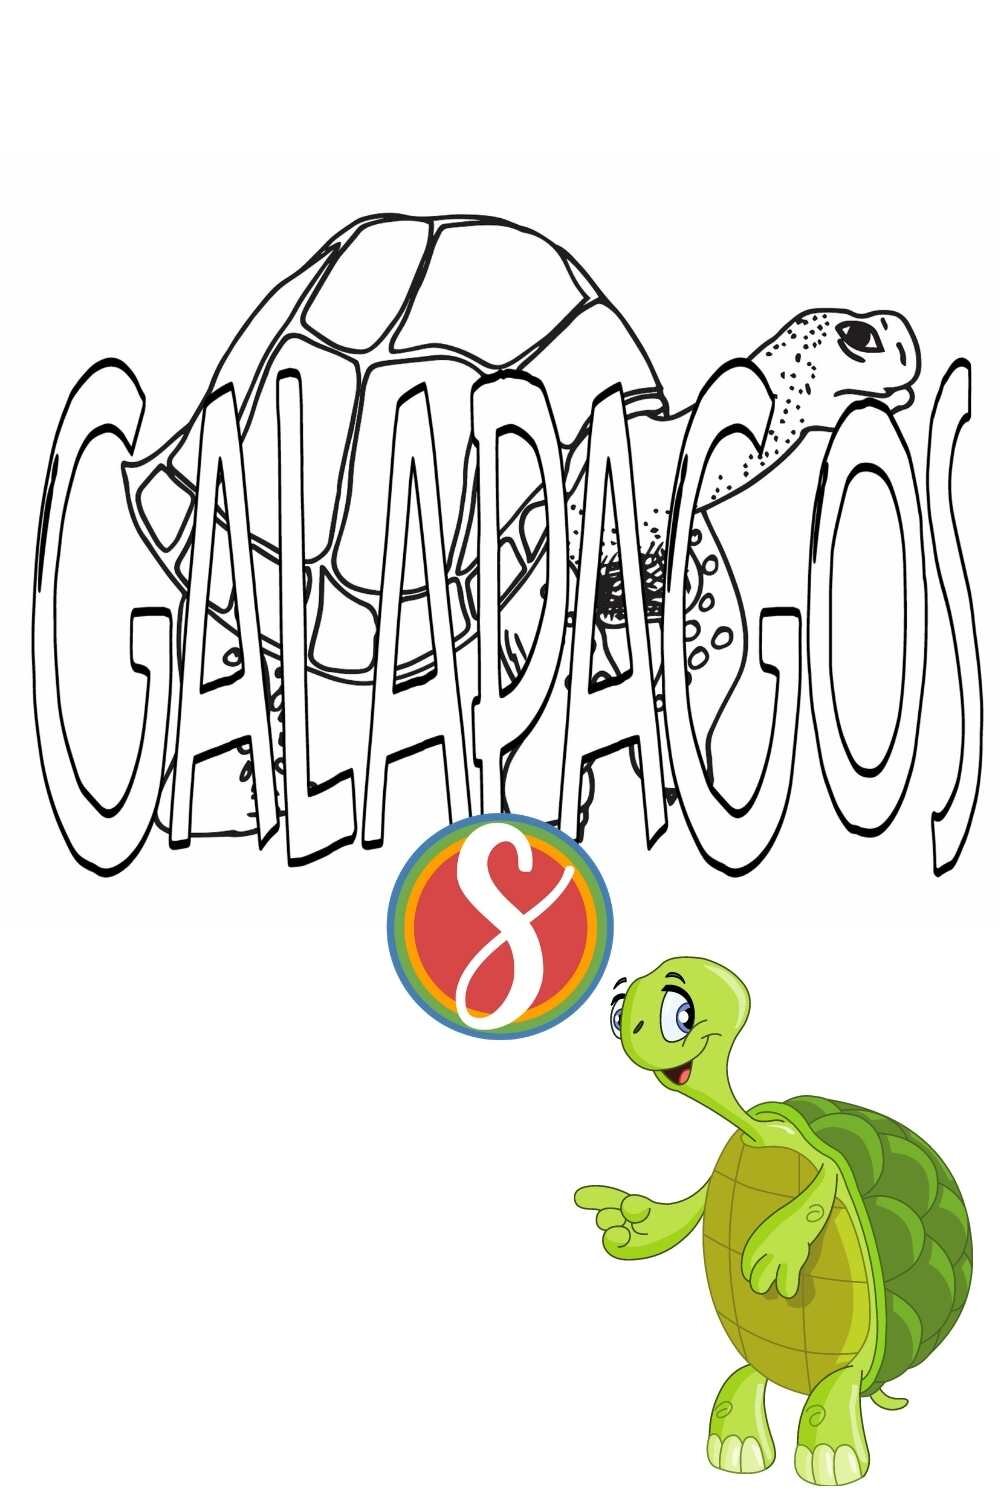 Galapagos tortoise coloring page - free coloring page printable from Stevie Doodles